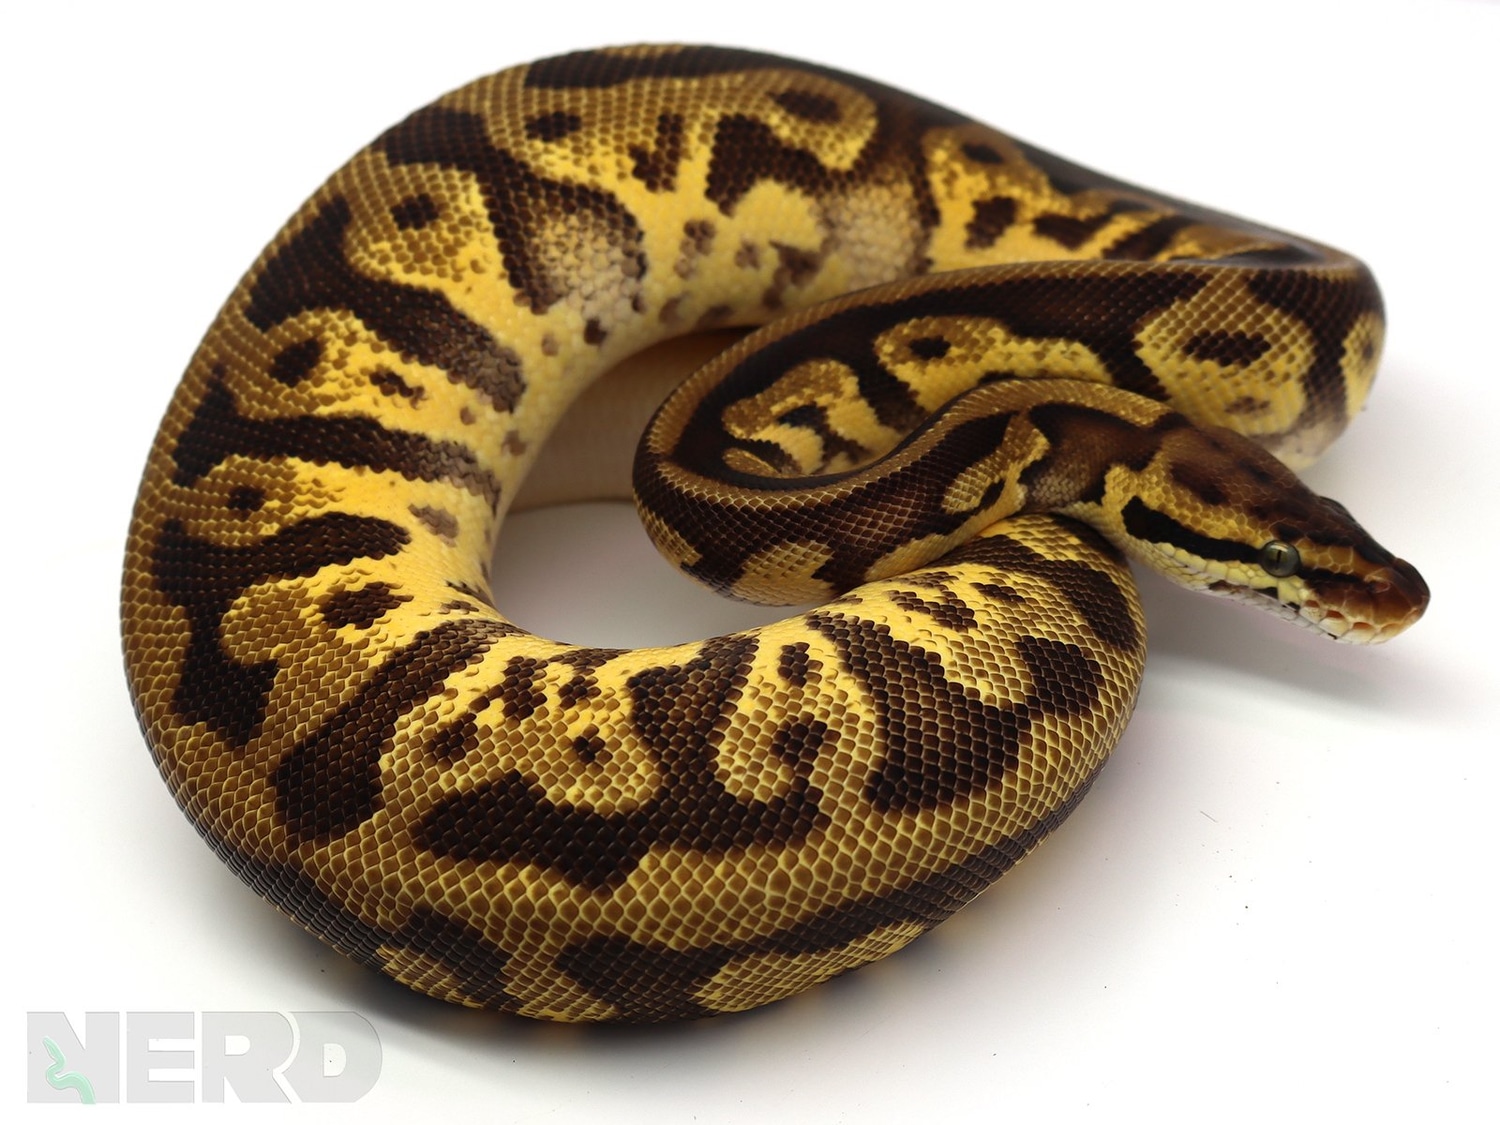 Pastel Enchi Leopard Yellowbelly Fader Odium Ball Python by New England Reptile Distributors